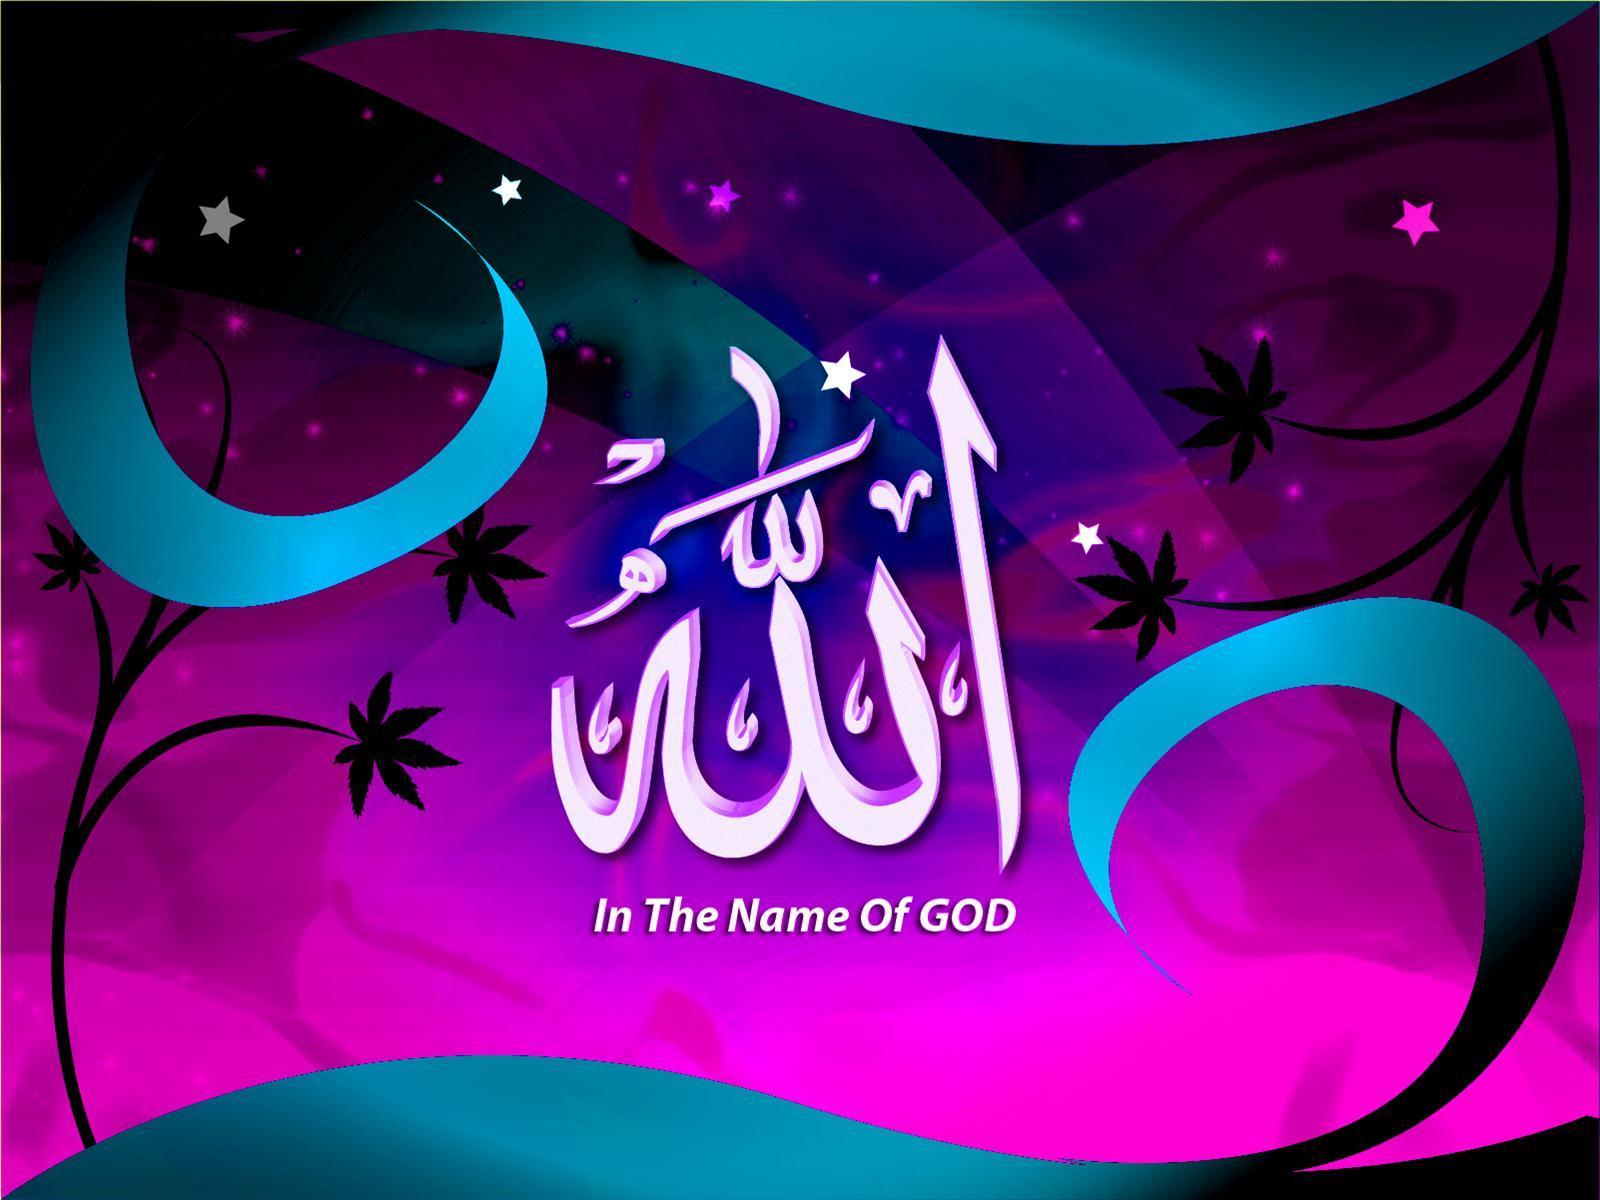 Beauty allah is king of the world Wallpaper 2015